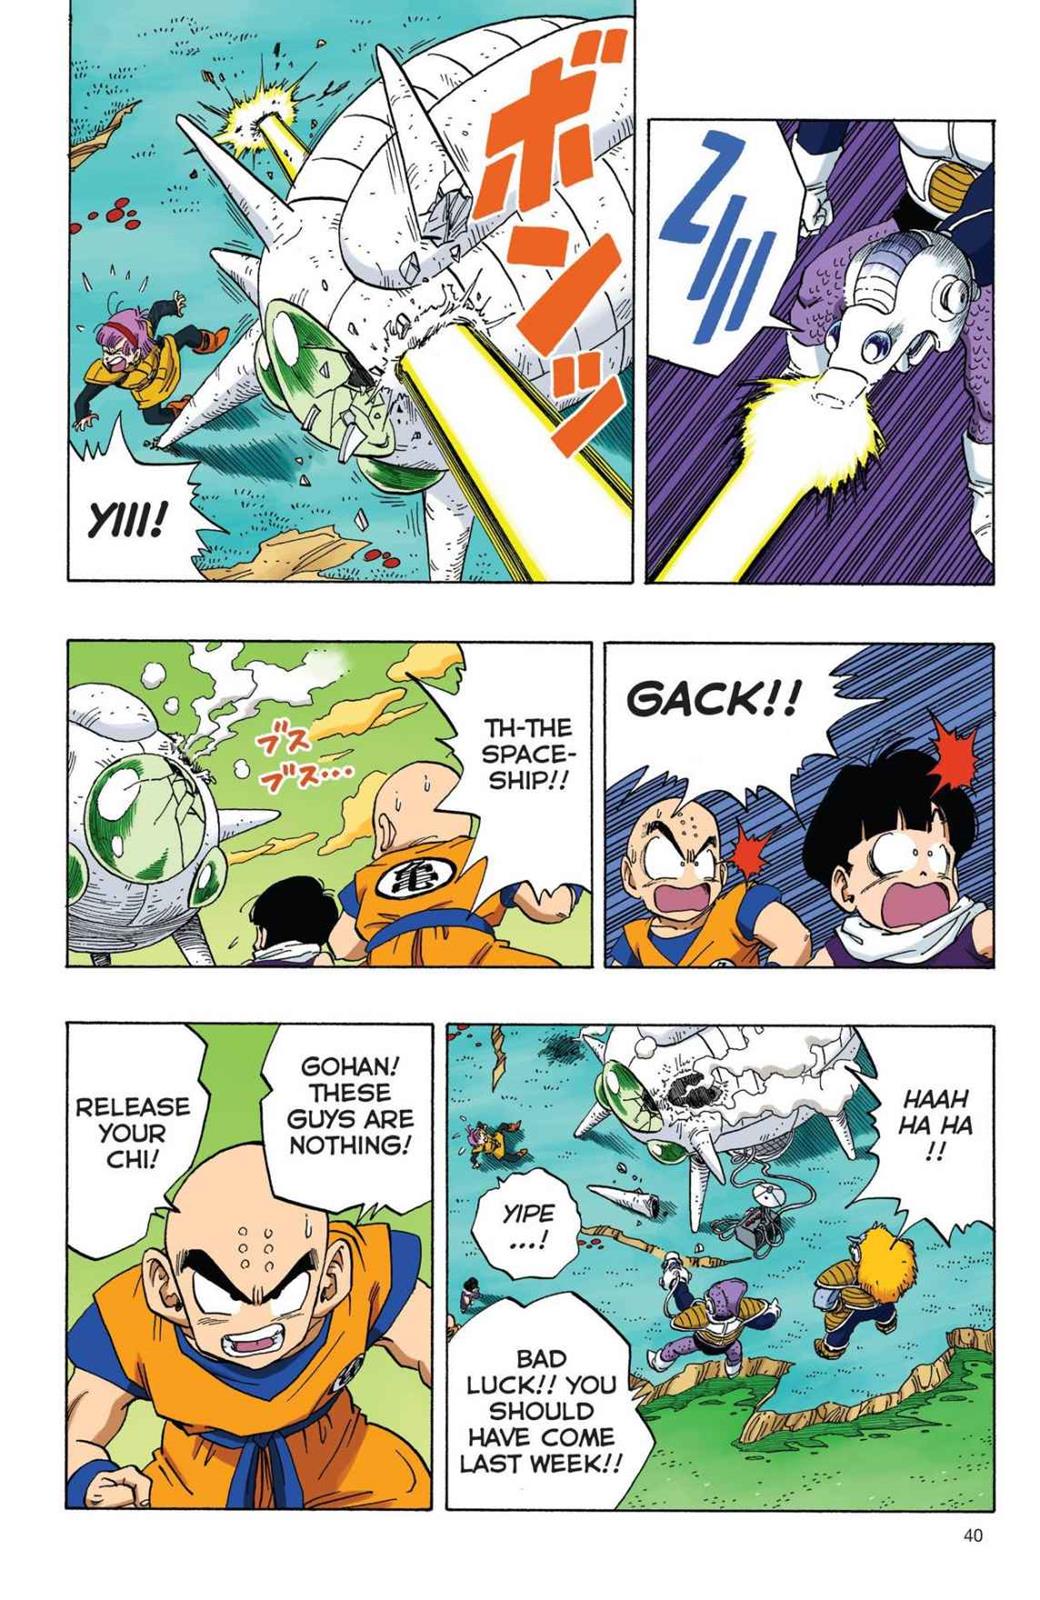 Dragon Ball Full Color Freeza Arc Vol. 1 Ch. 3 The Mysterious Strangers